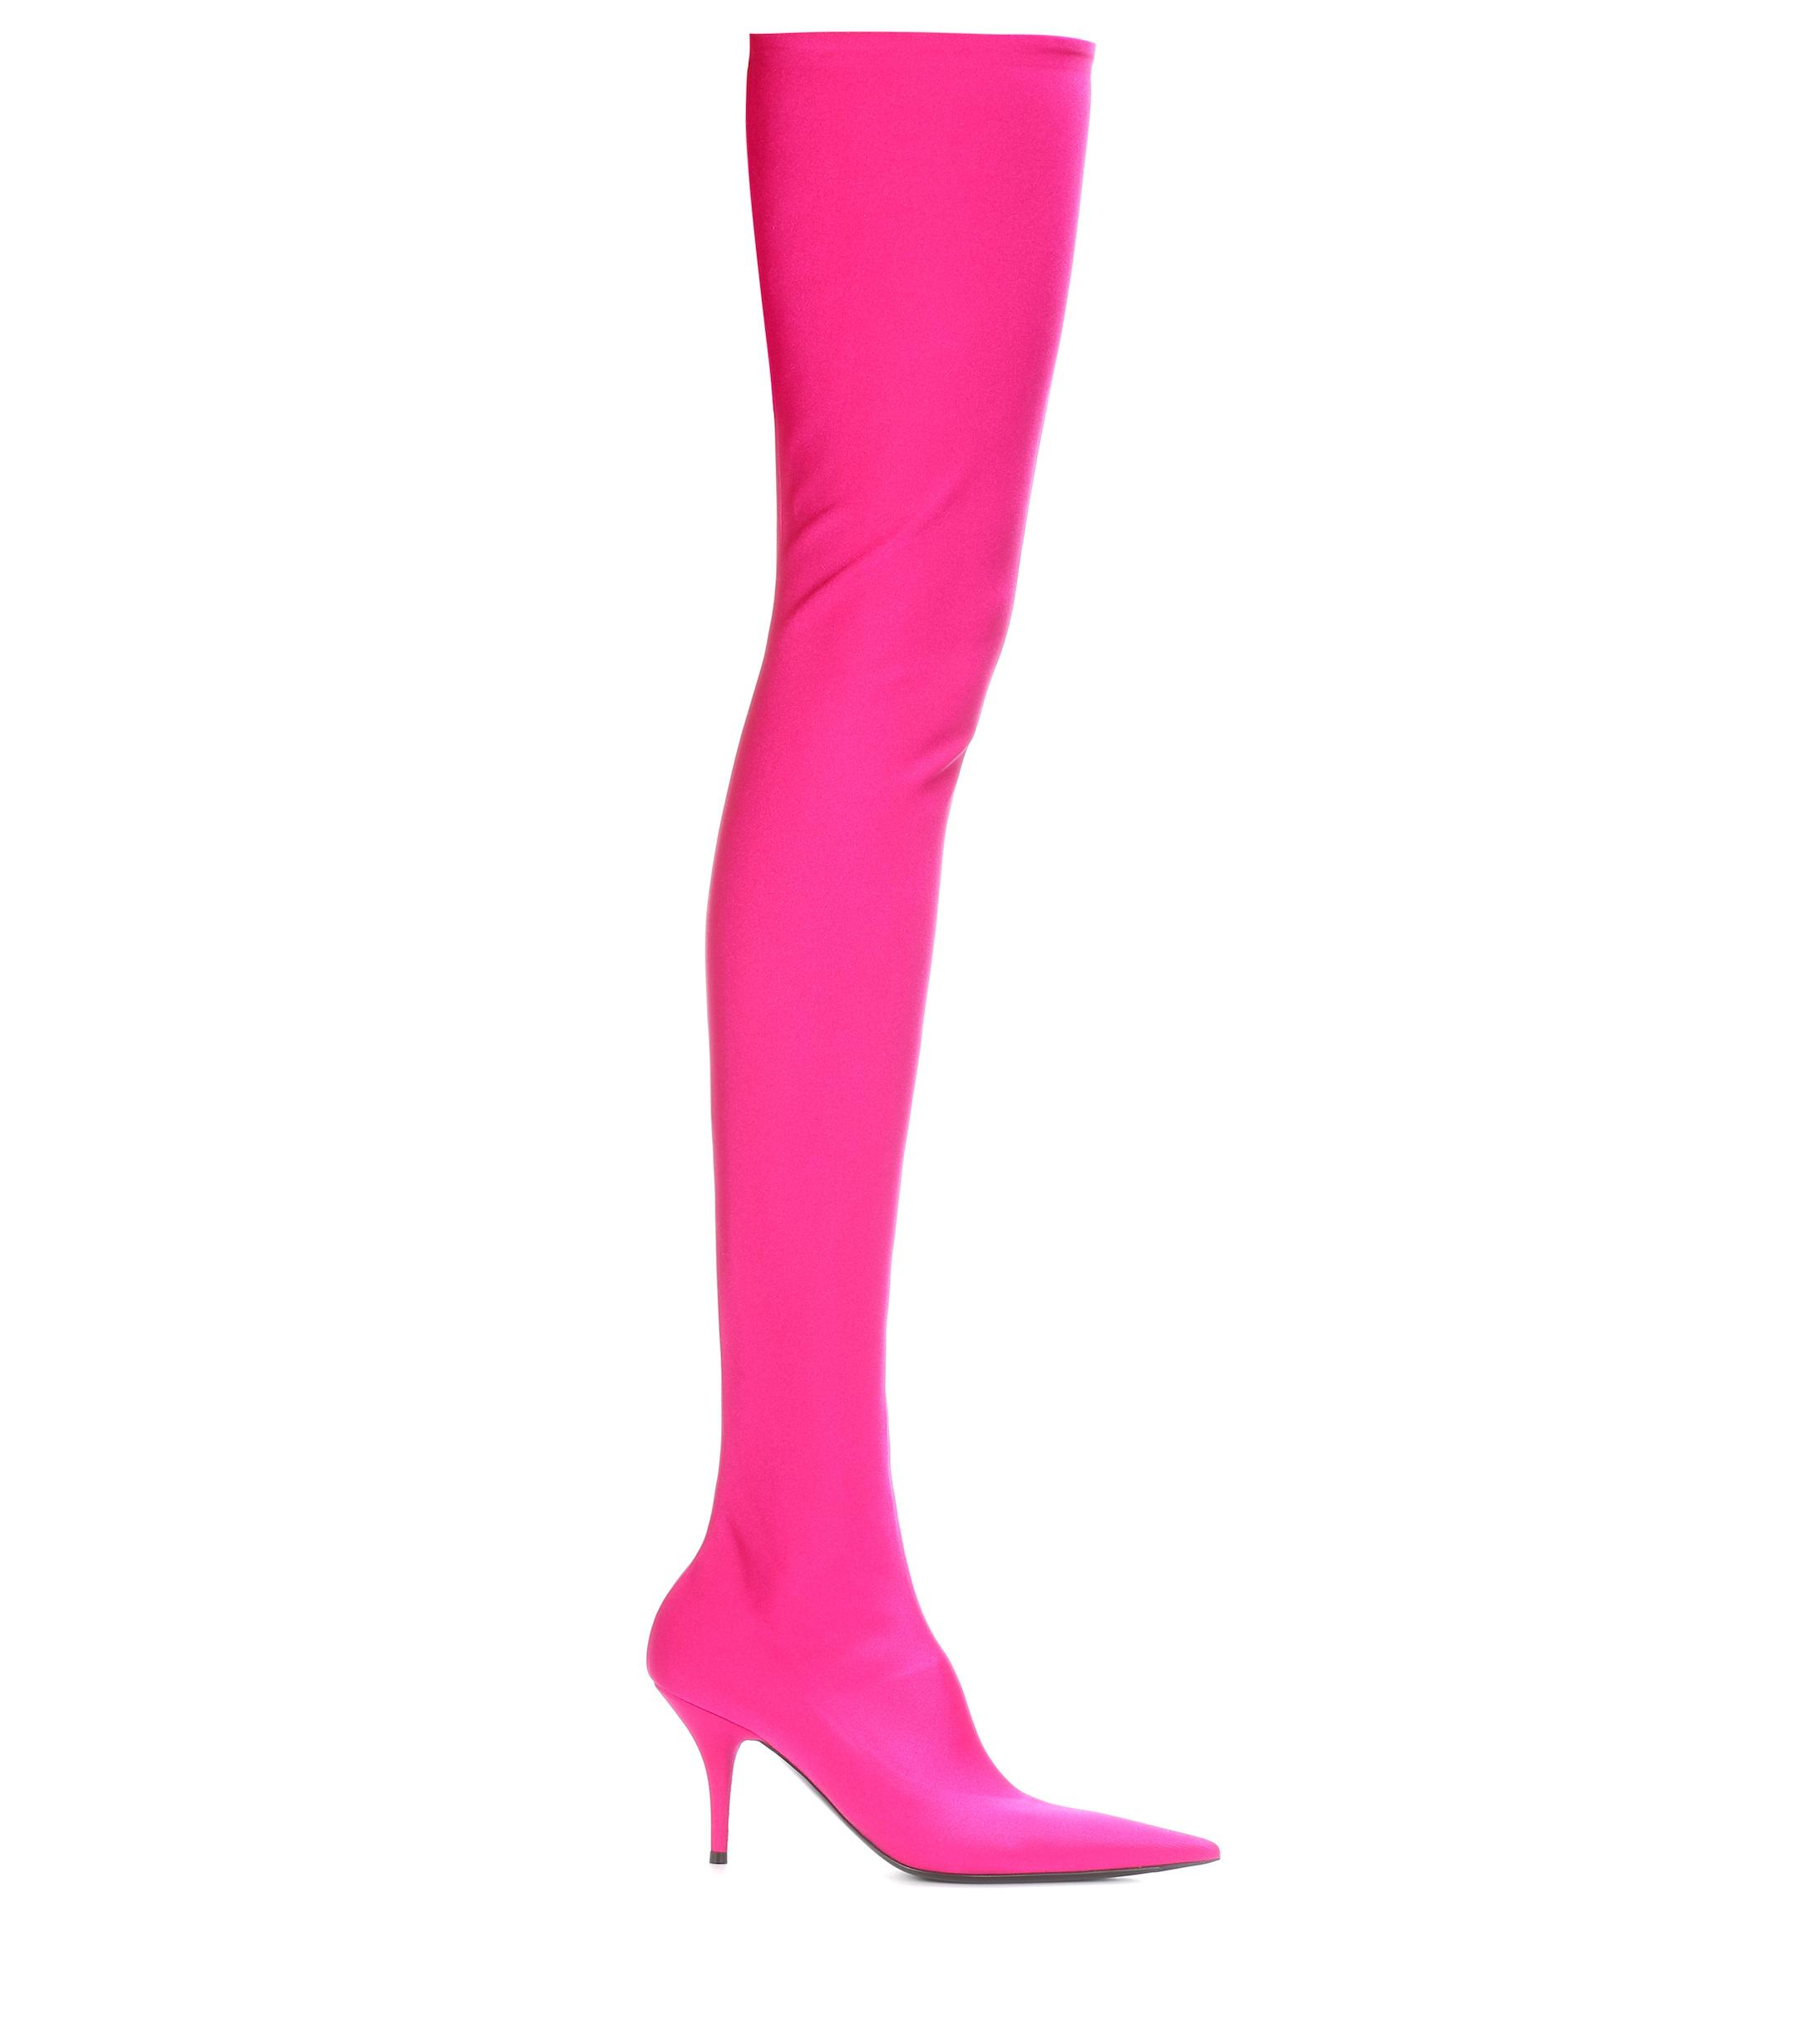 Balenciaga Leather Knife Over-the-knee Boots in Pink - Lyst